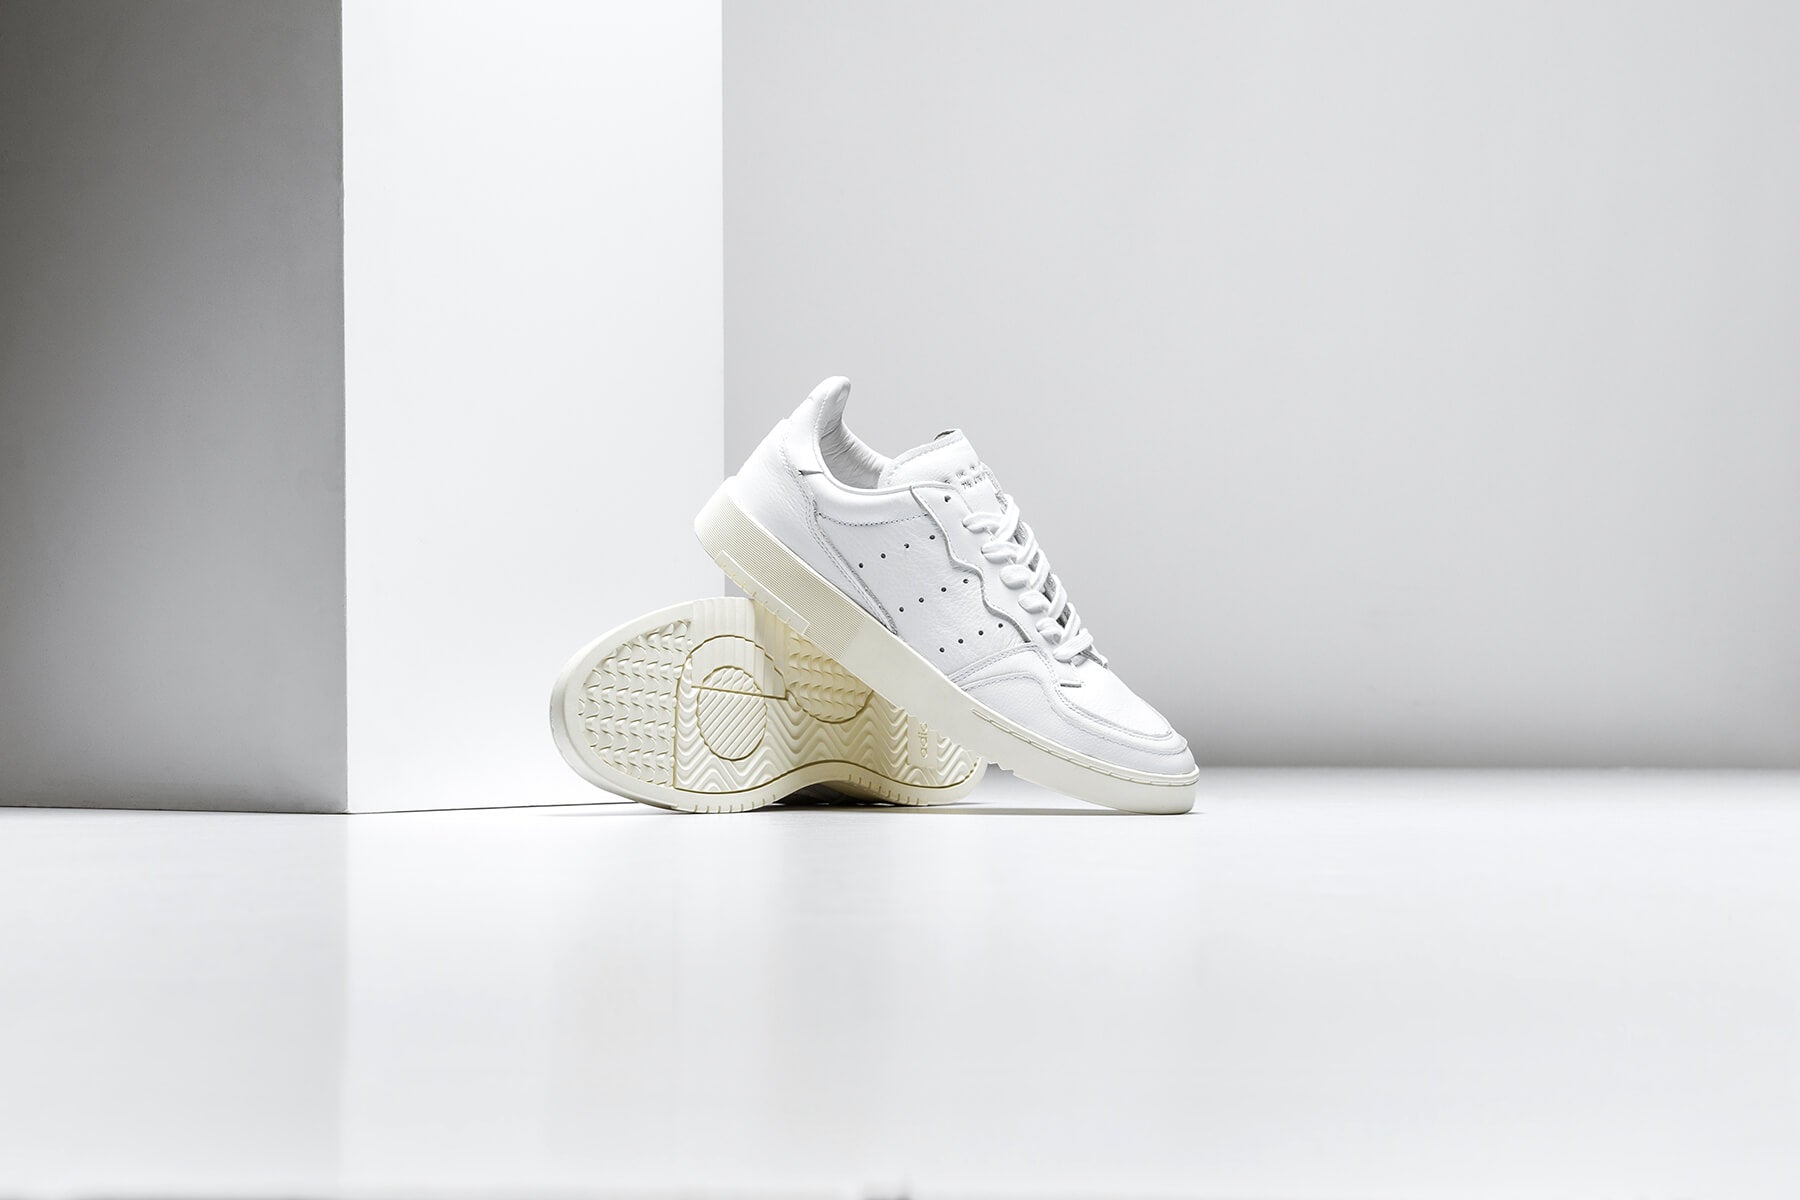 Adidas Originals "Crystal White/Chalk White" Available Now – Feature